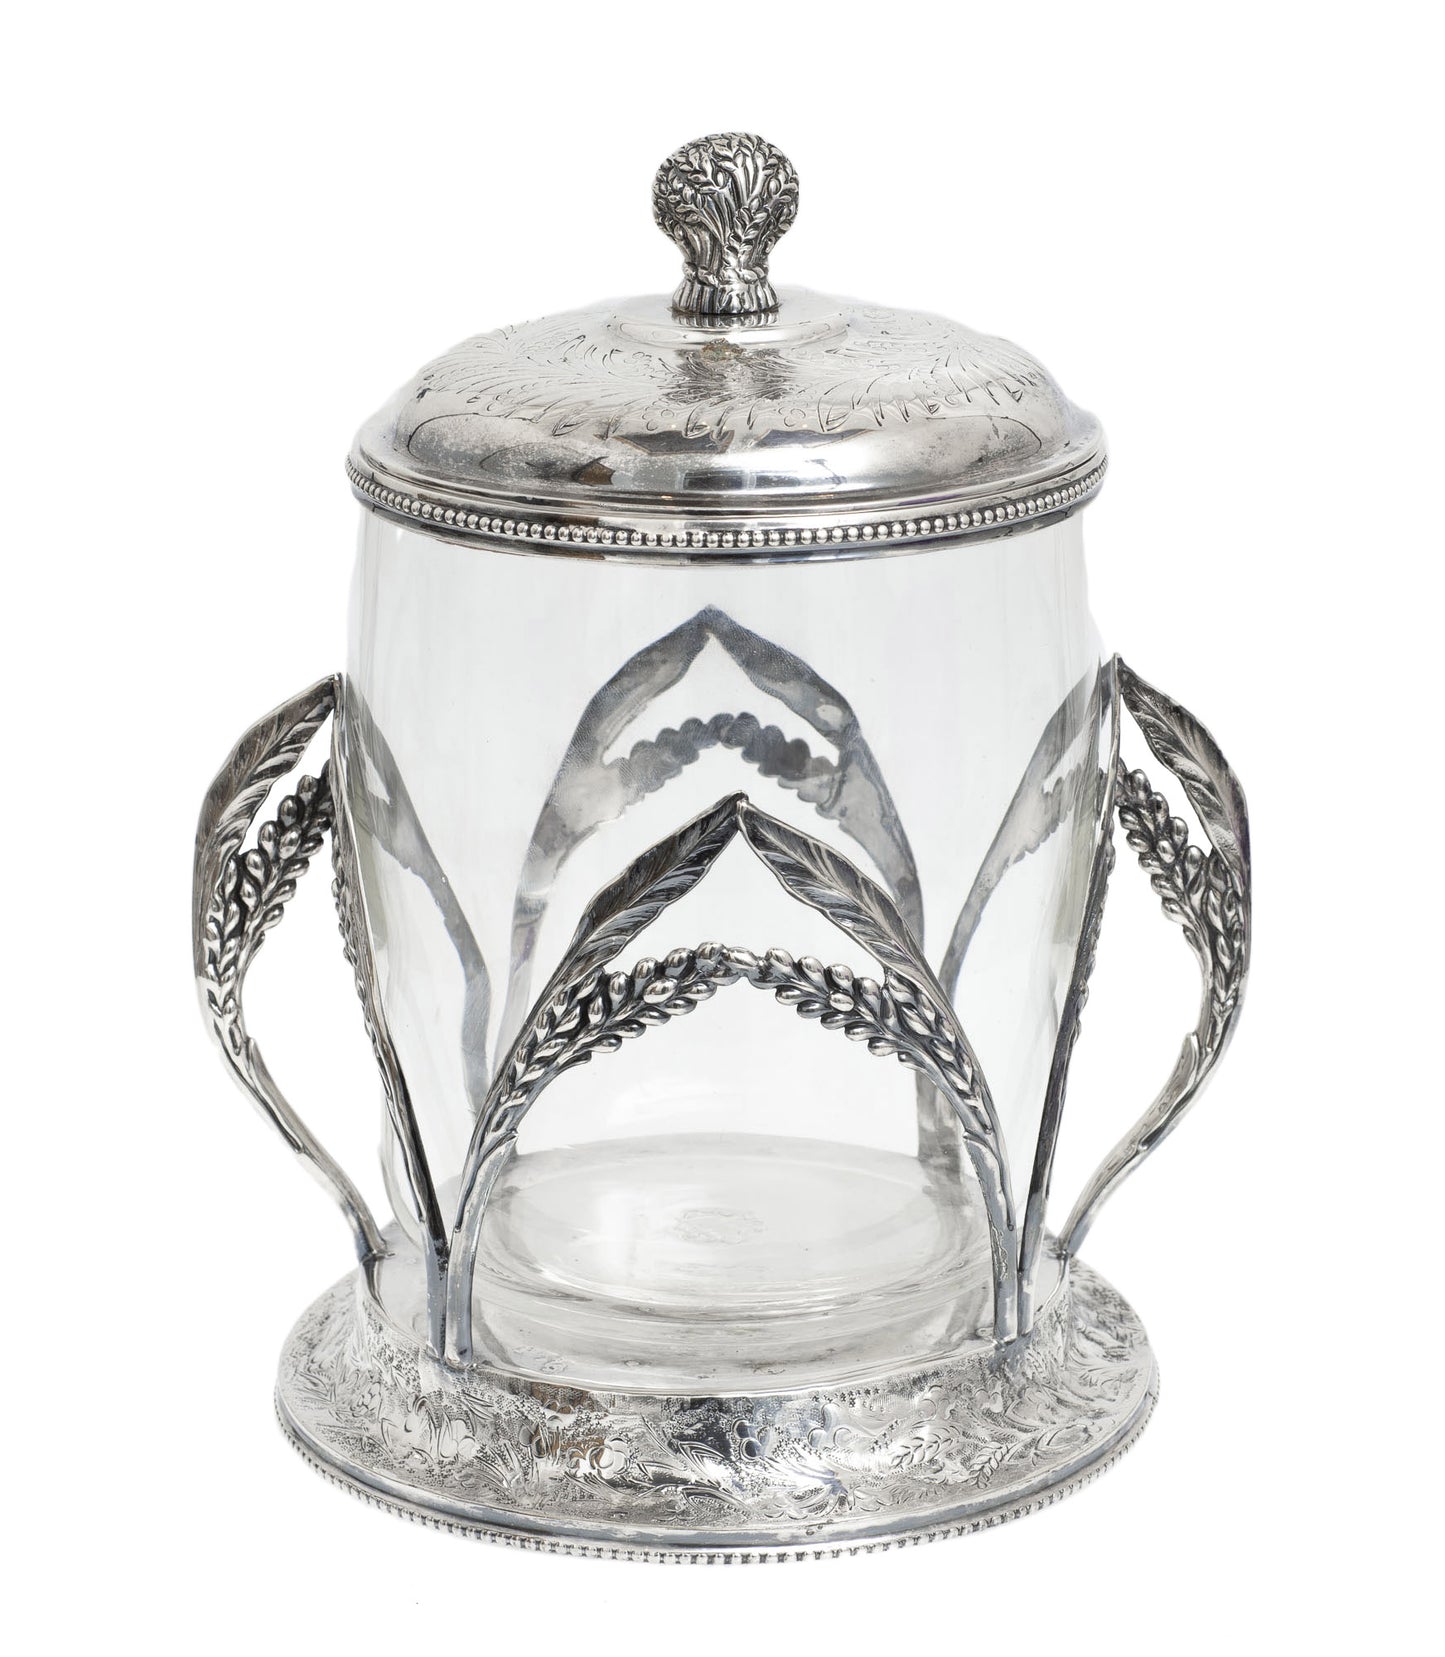 Antique Silver Plated & Clear Hand Blown Glass Biscuit Barrel/Cookie Jar (2873)